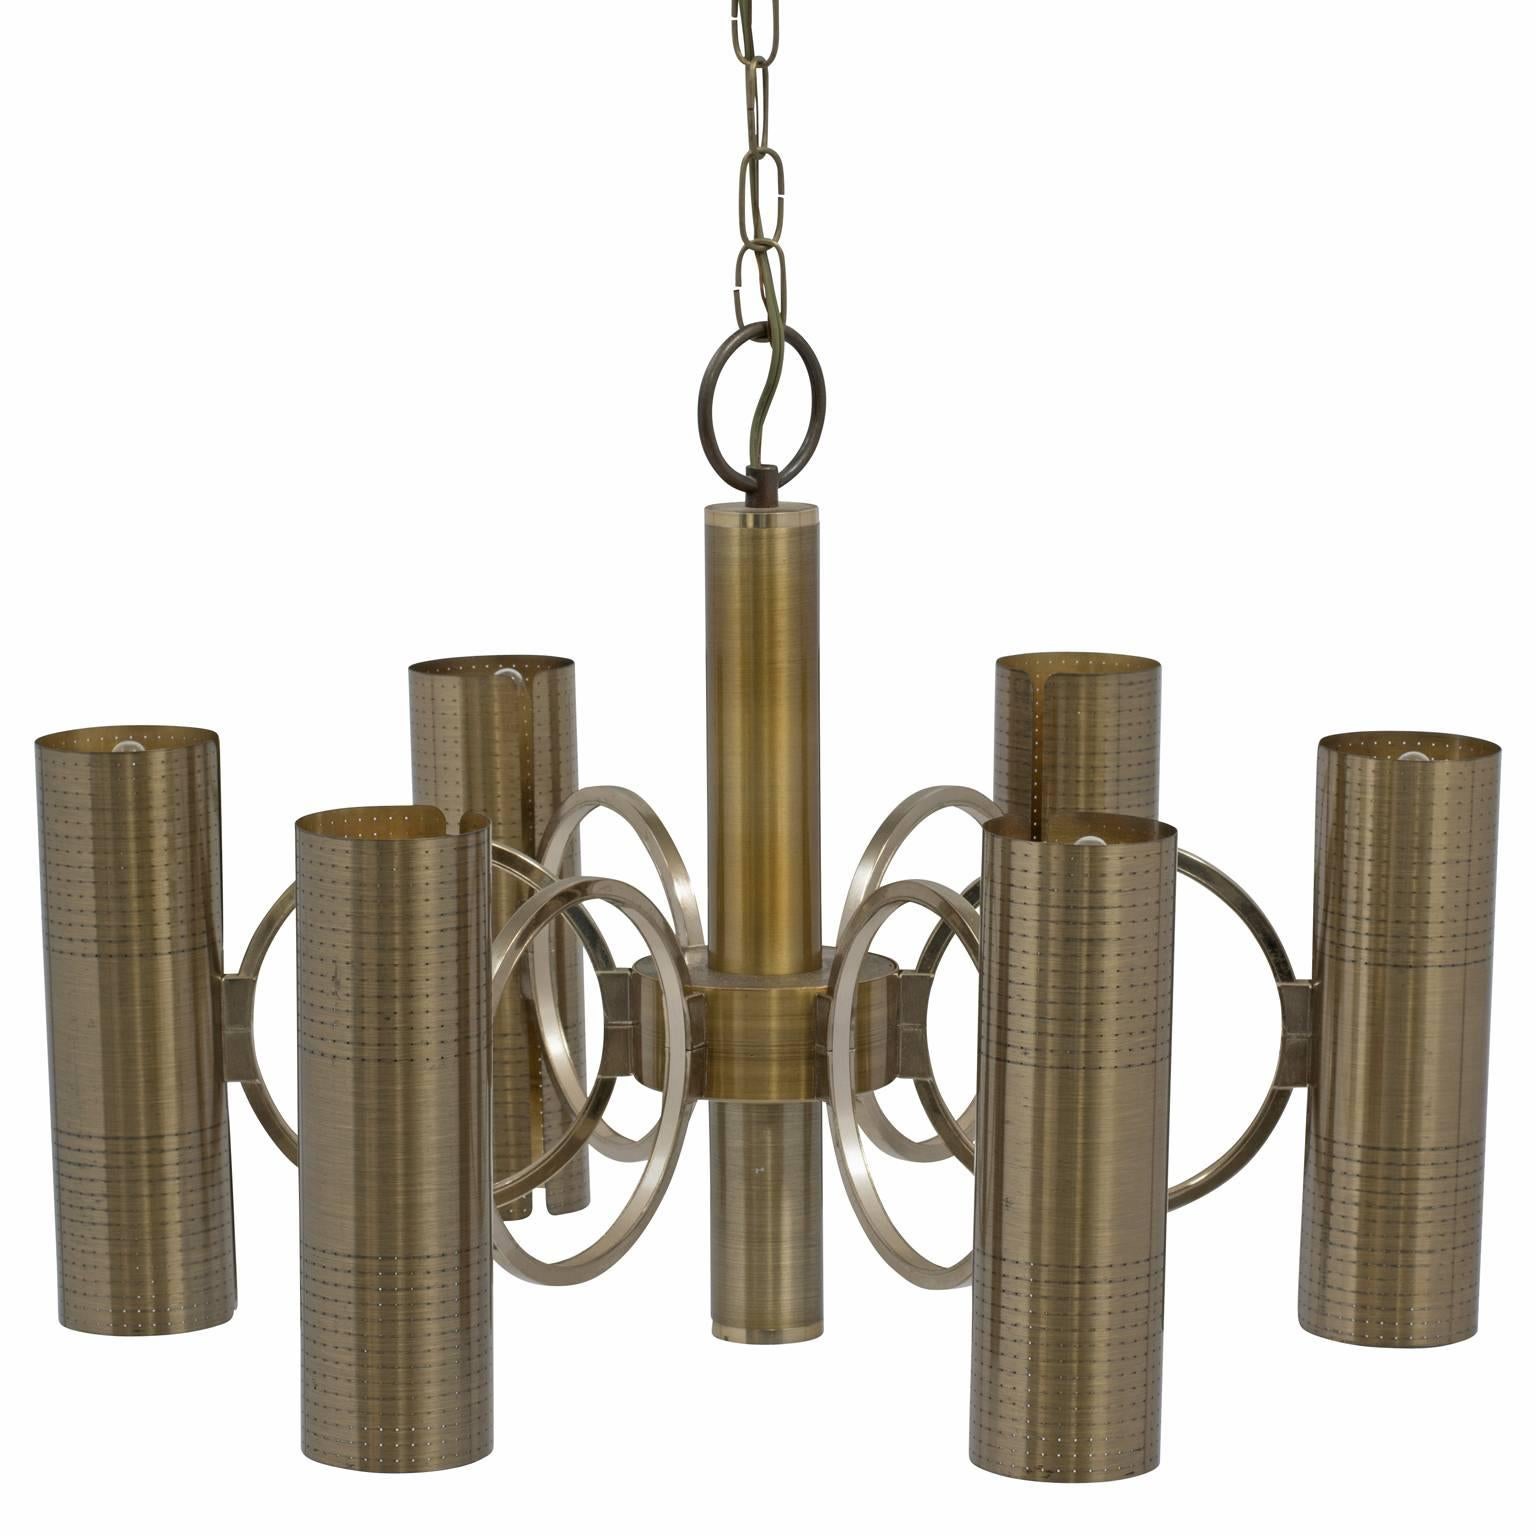 High-impact lacquered burnished brass chandelier with perforated, pin-pricked cylinder lamps held by chrome rings, designed by Gaetano Sciolari. It has a modern machine-age vibe. Six upward and six downward lights. Chandelier has been rewired in the